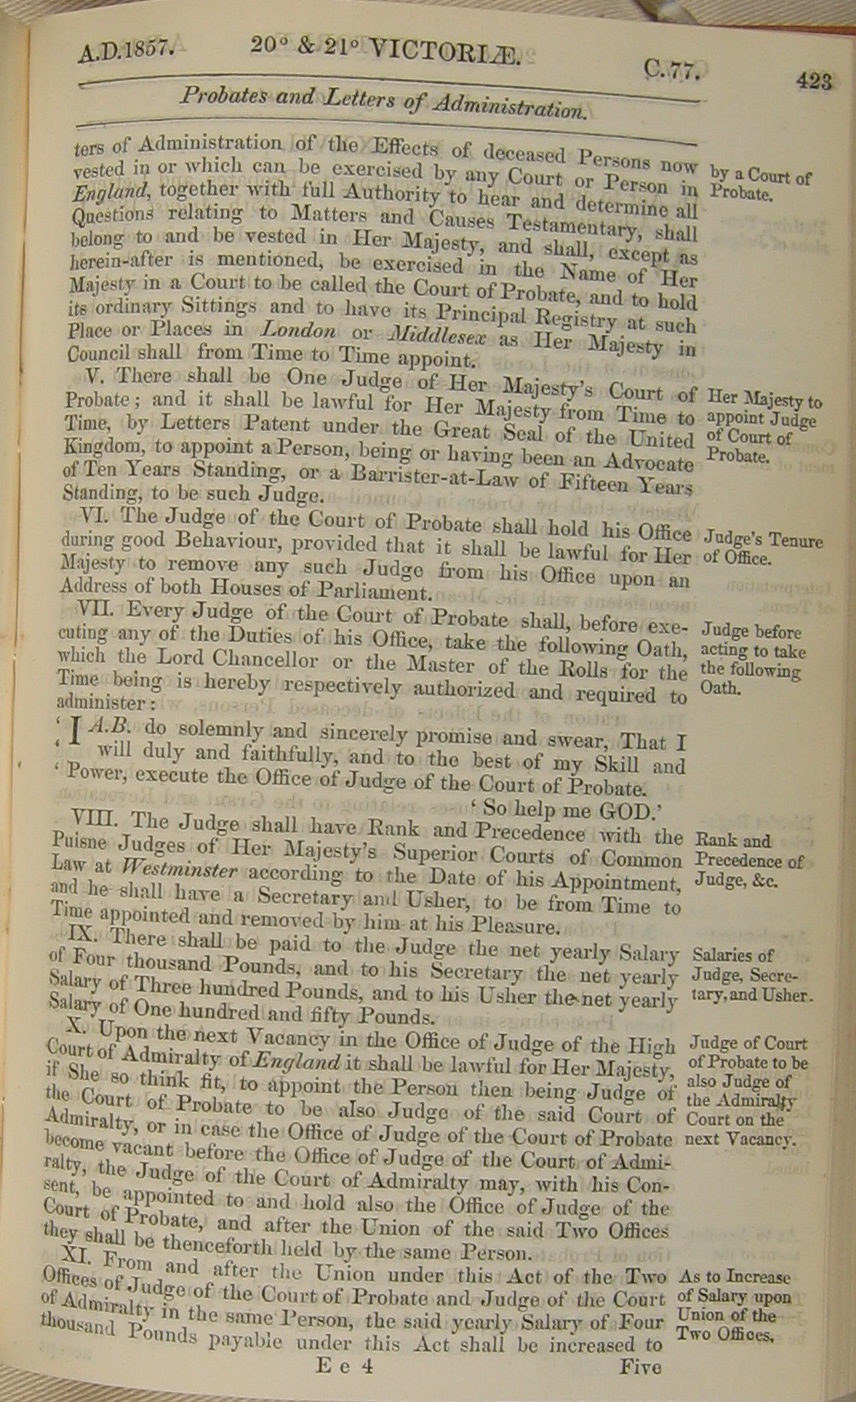 Image of 20 & 21 Victoria I, c. 77 (page 2 of 34). Click for larger image.